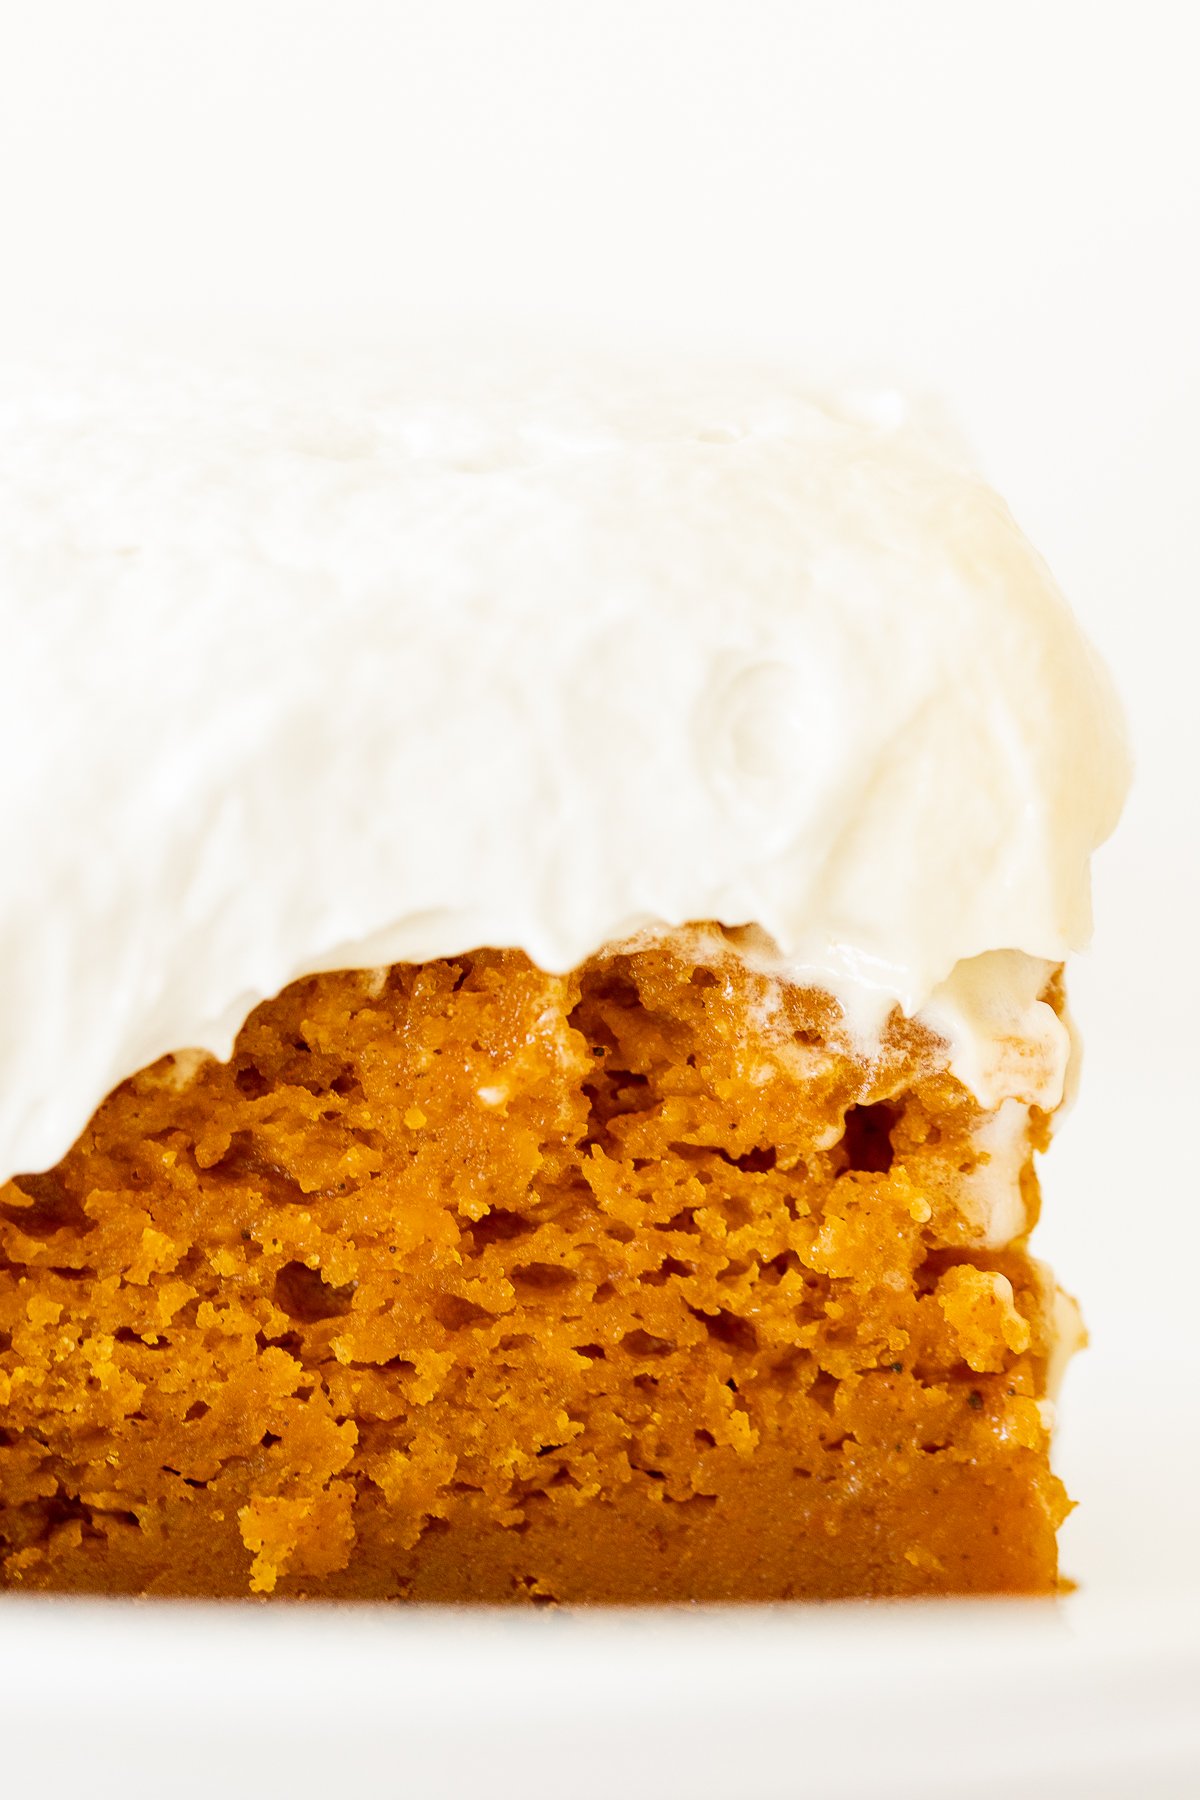 A slice of pumpkin cake with fluffy cream cheese frosting on a white plate.